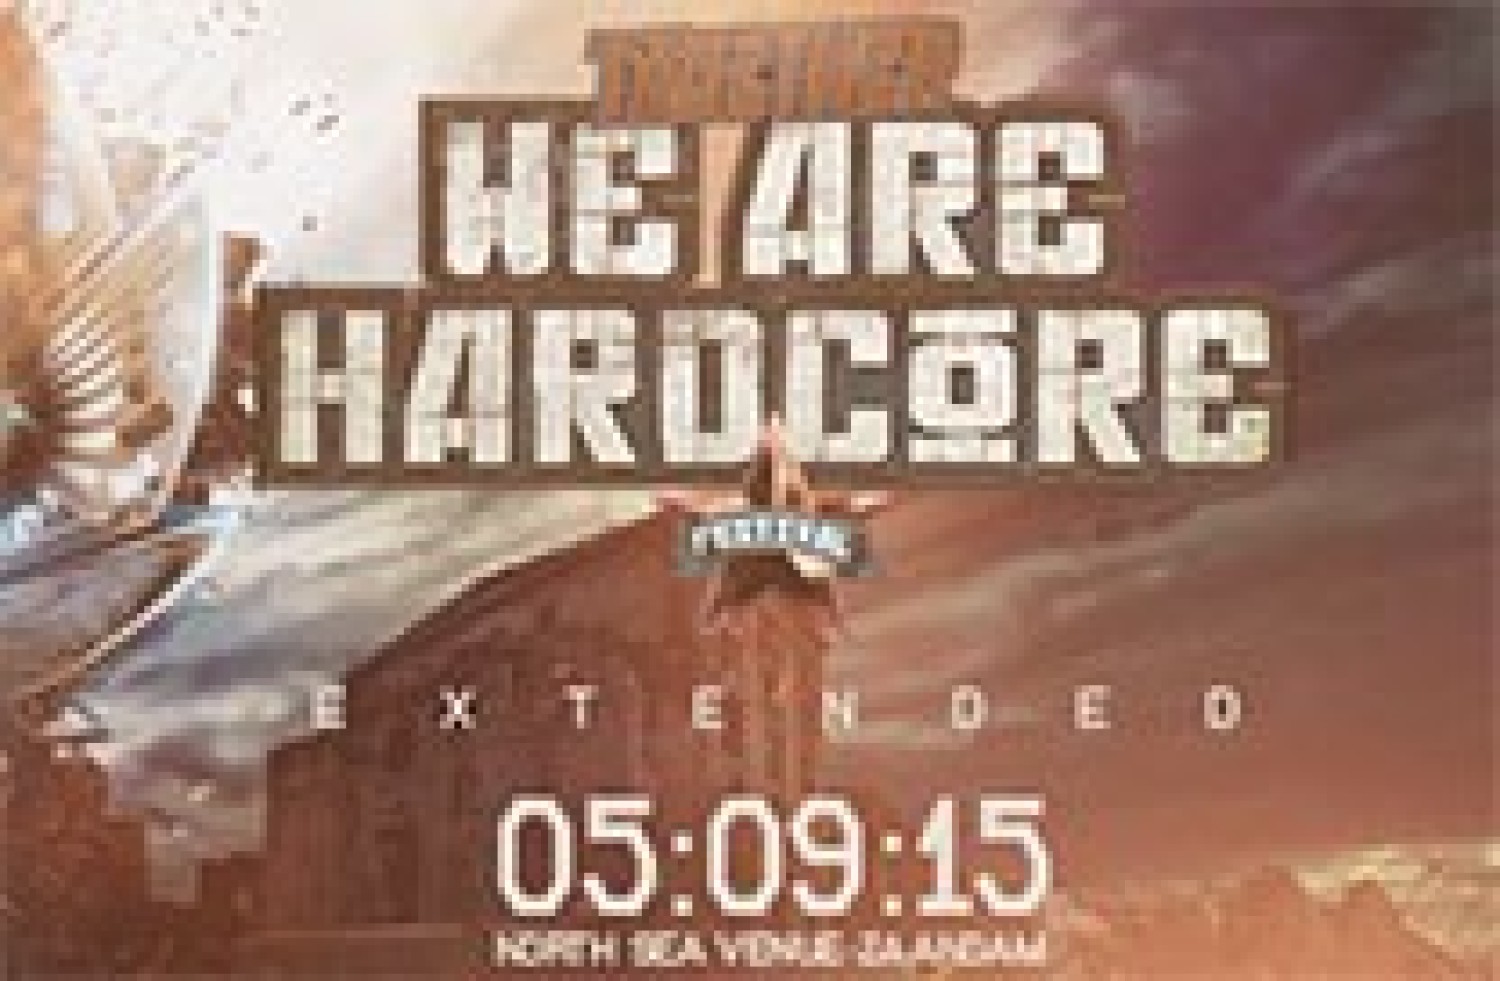 Party report: Together We Are Hardcore, Zaandam (05-09-2015)